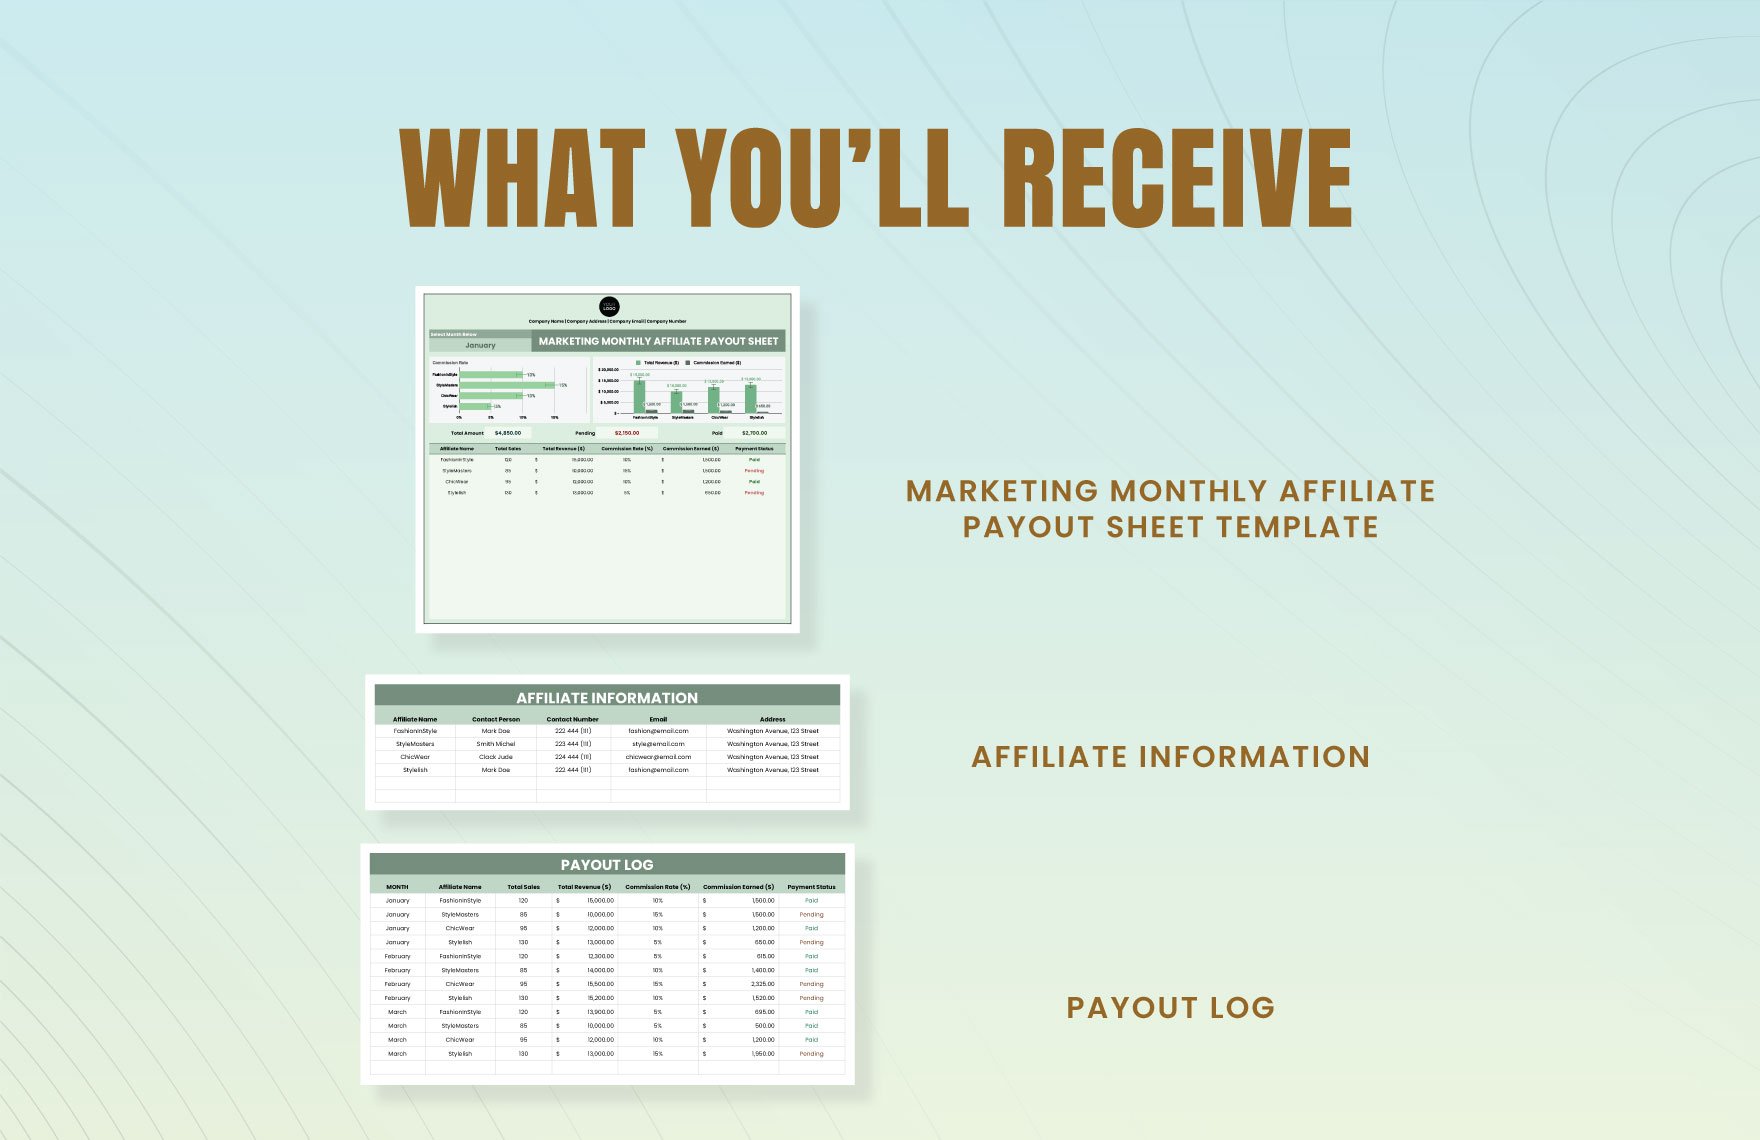 Marketing Monthly Affiliate Payout Sheet Template